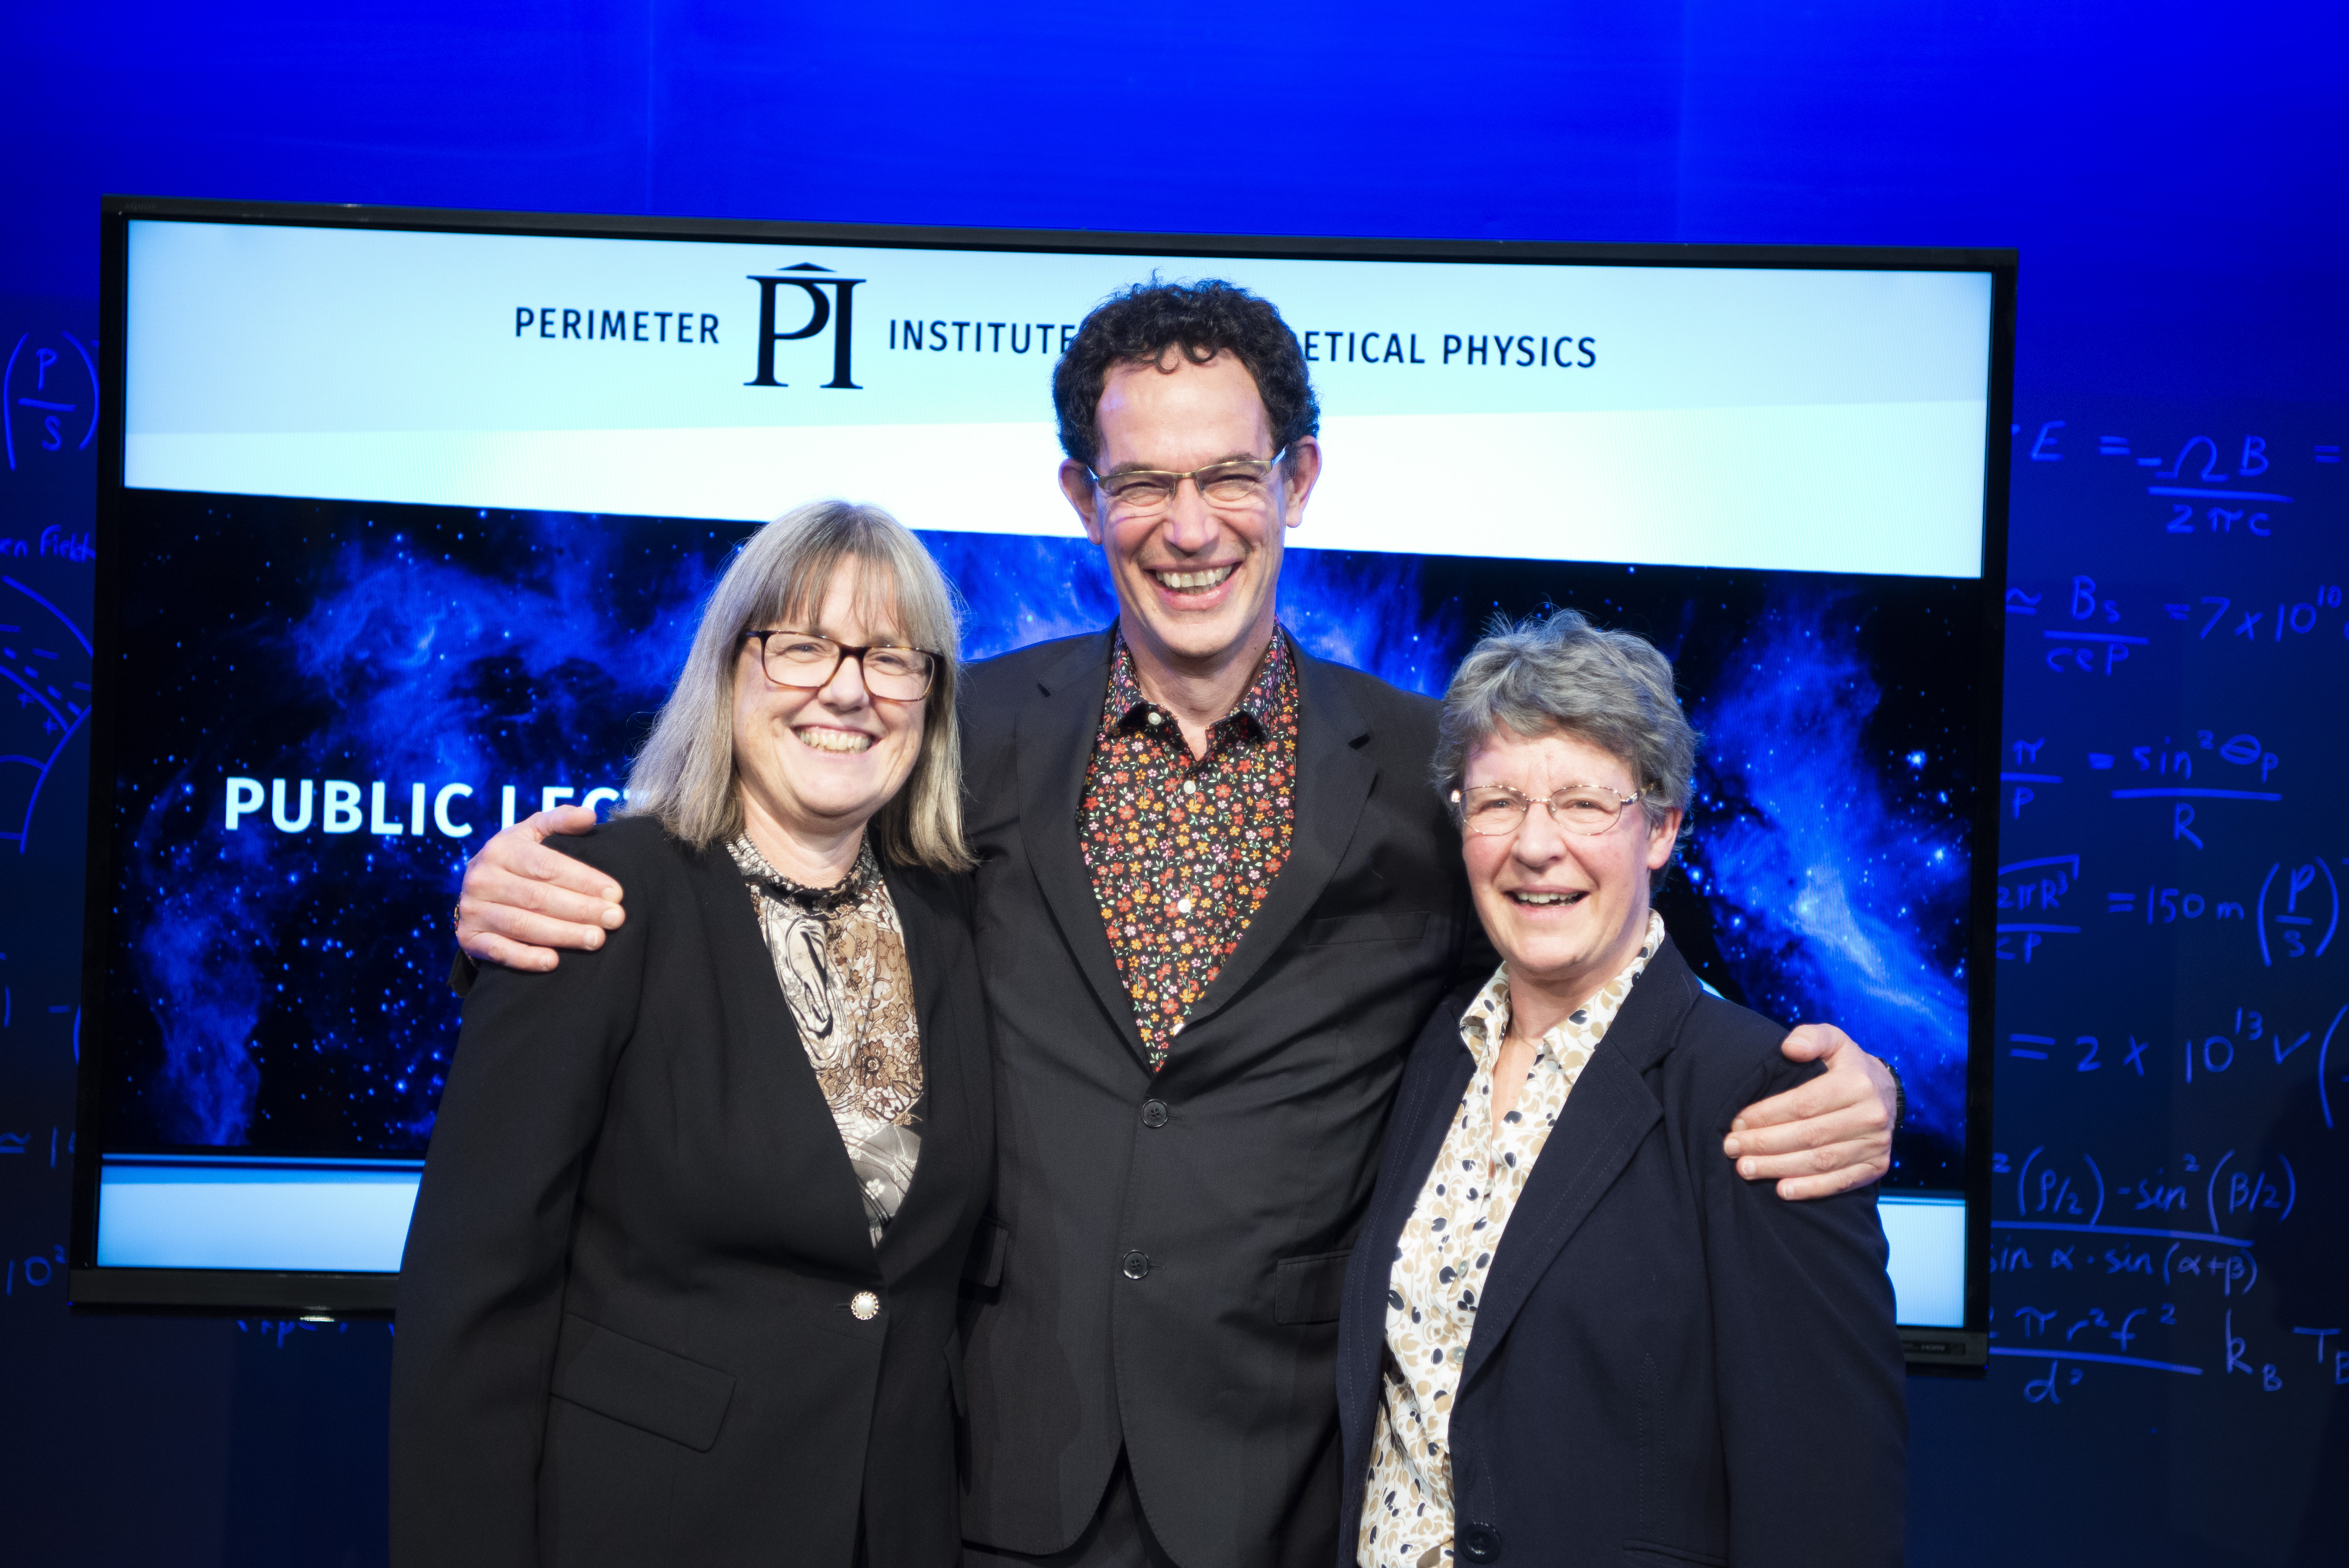 Donna Strickland, Neil Turok and Jocelyn Bell-Burnell standing together after Jocelyn's public lecture and the announcements of the new fellowships